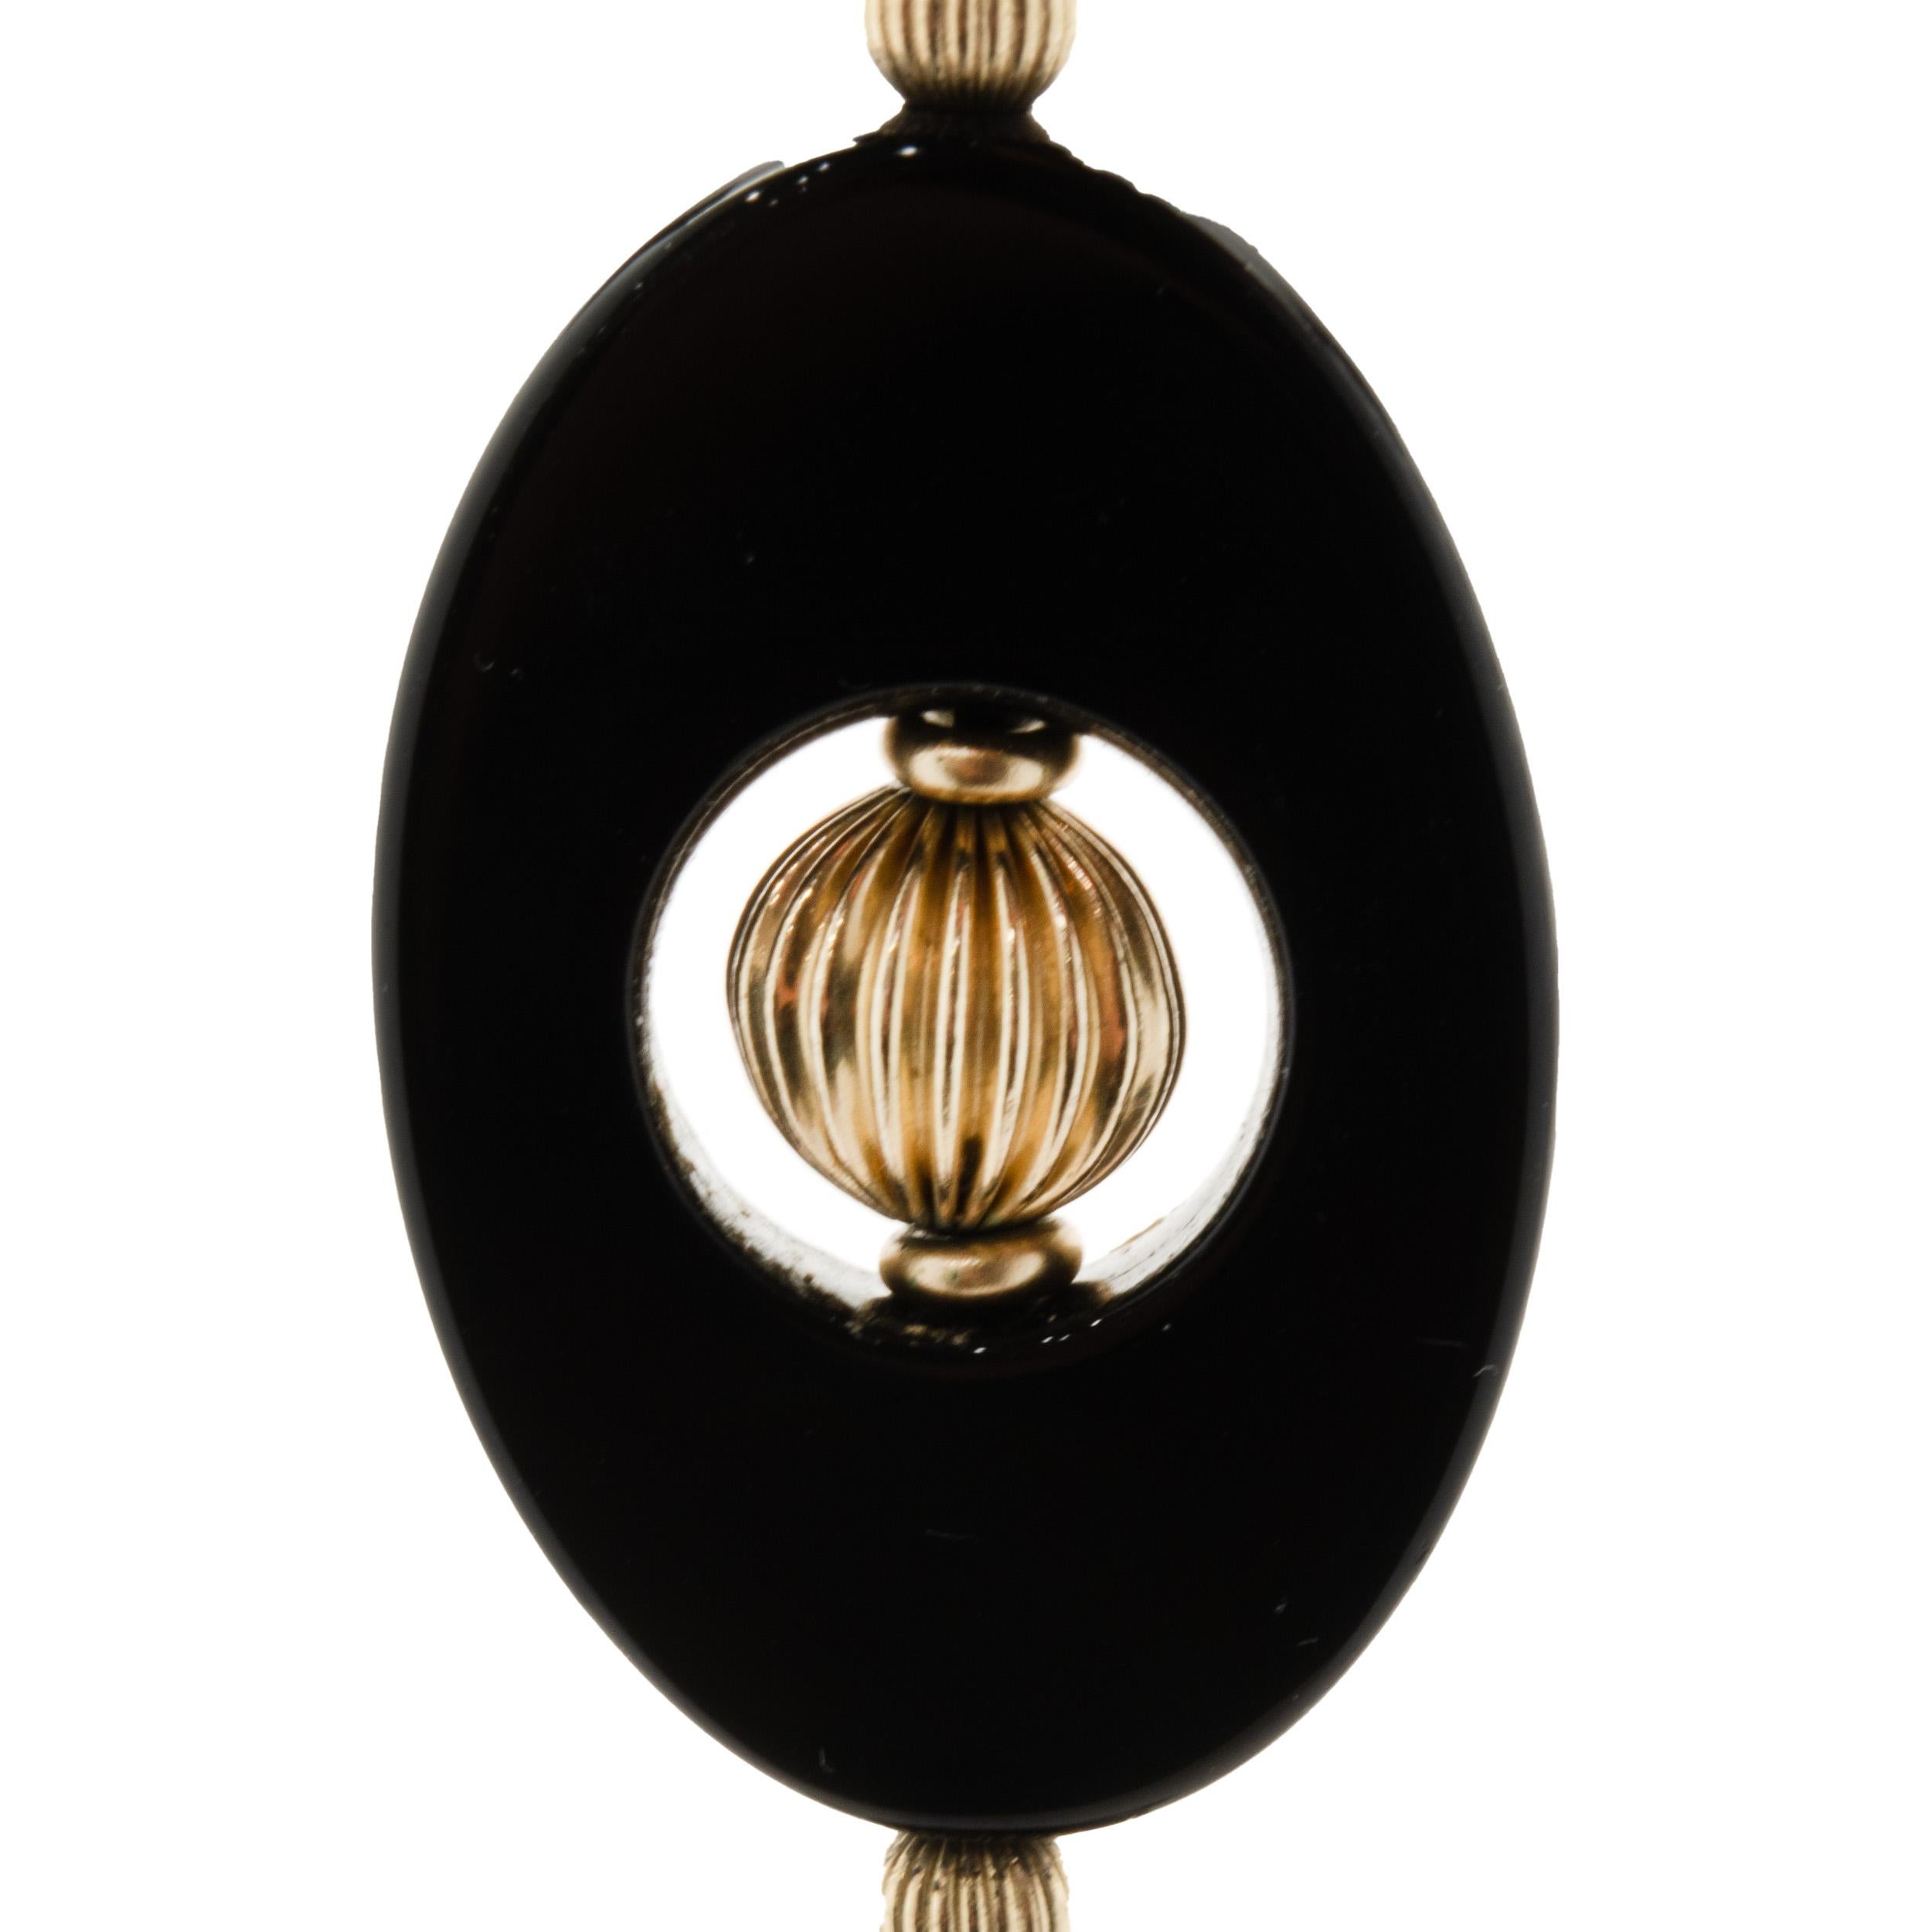 Designer: custom 
Material: 14k yellow gold / Black Onyx
Dimensions: necklace measures 33-inches in length
Weight: 101 grams
